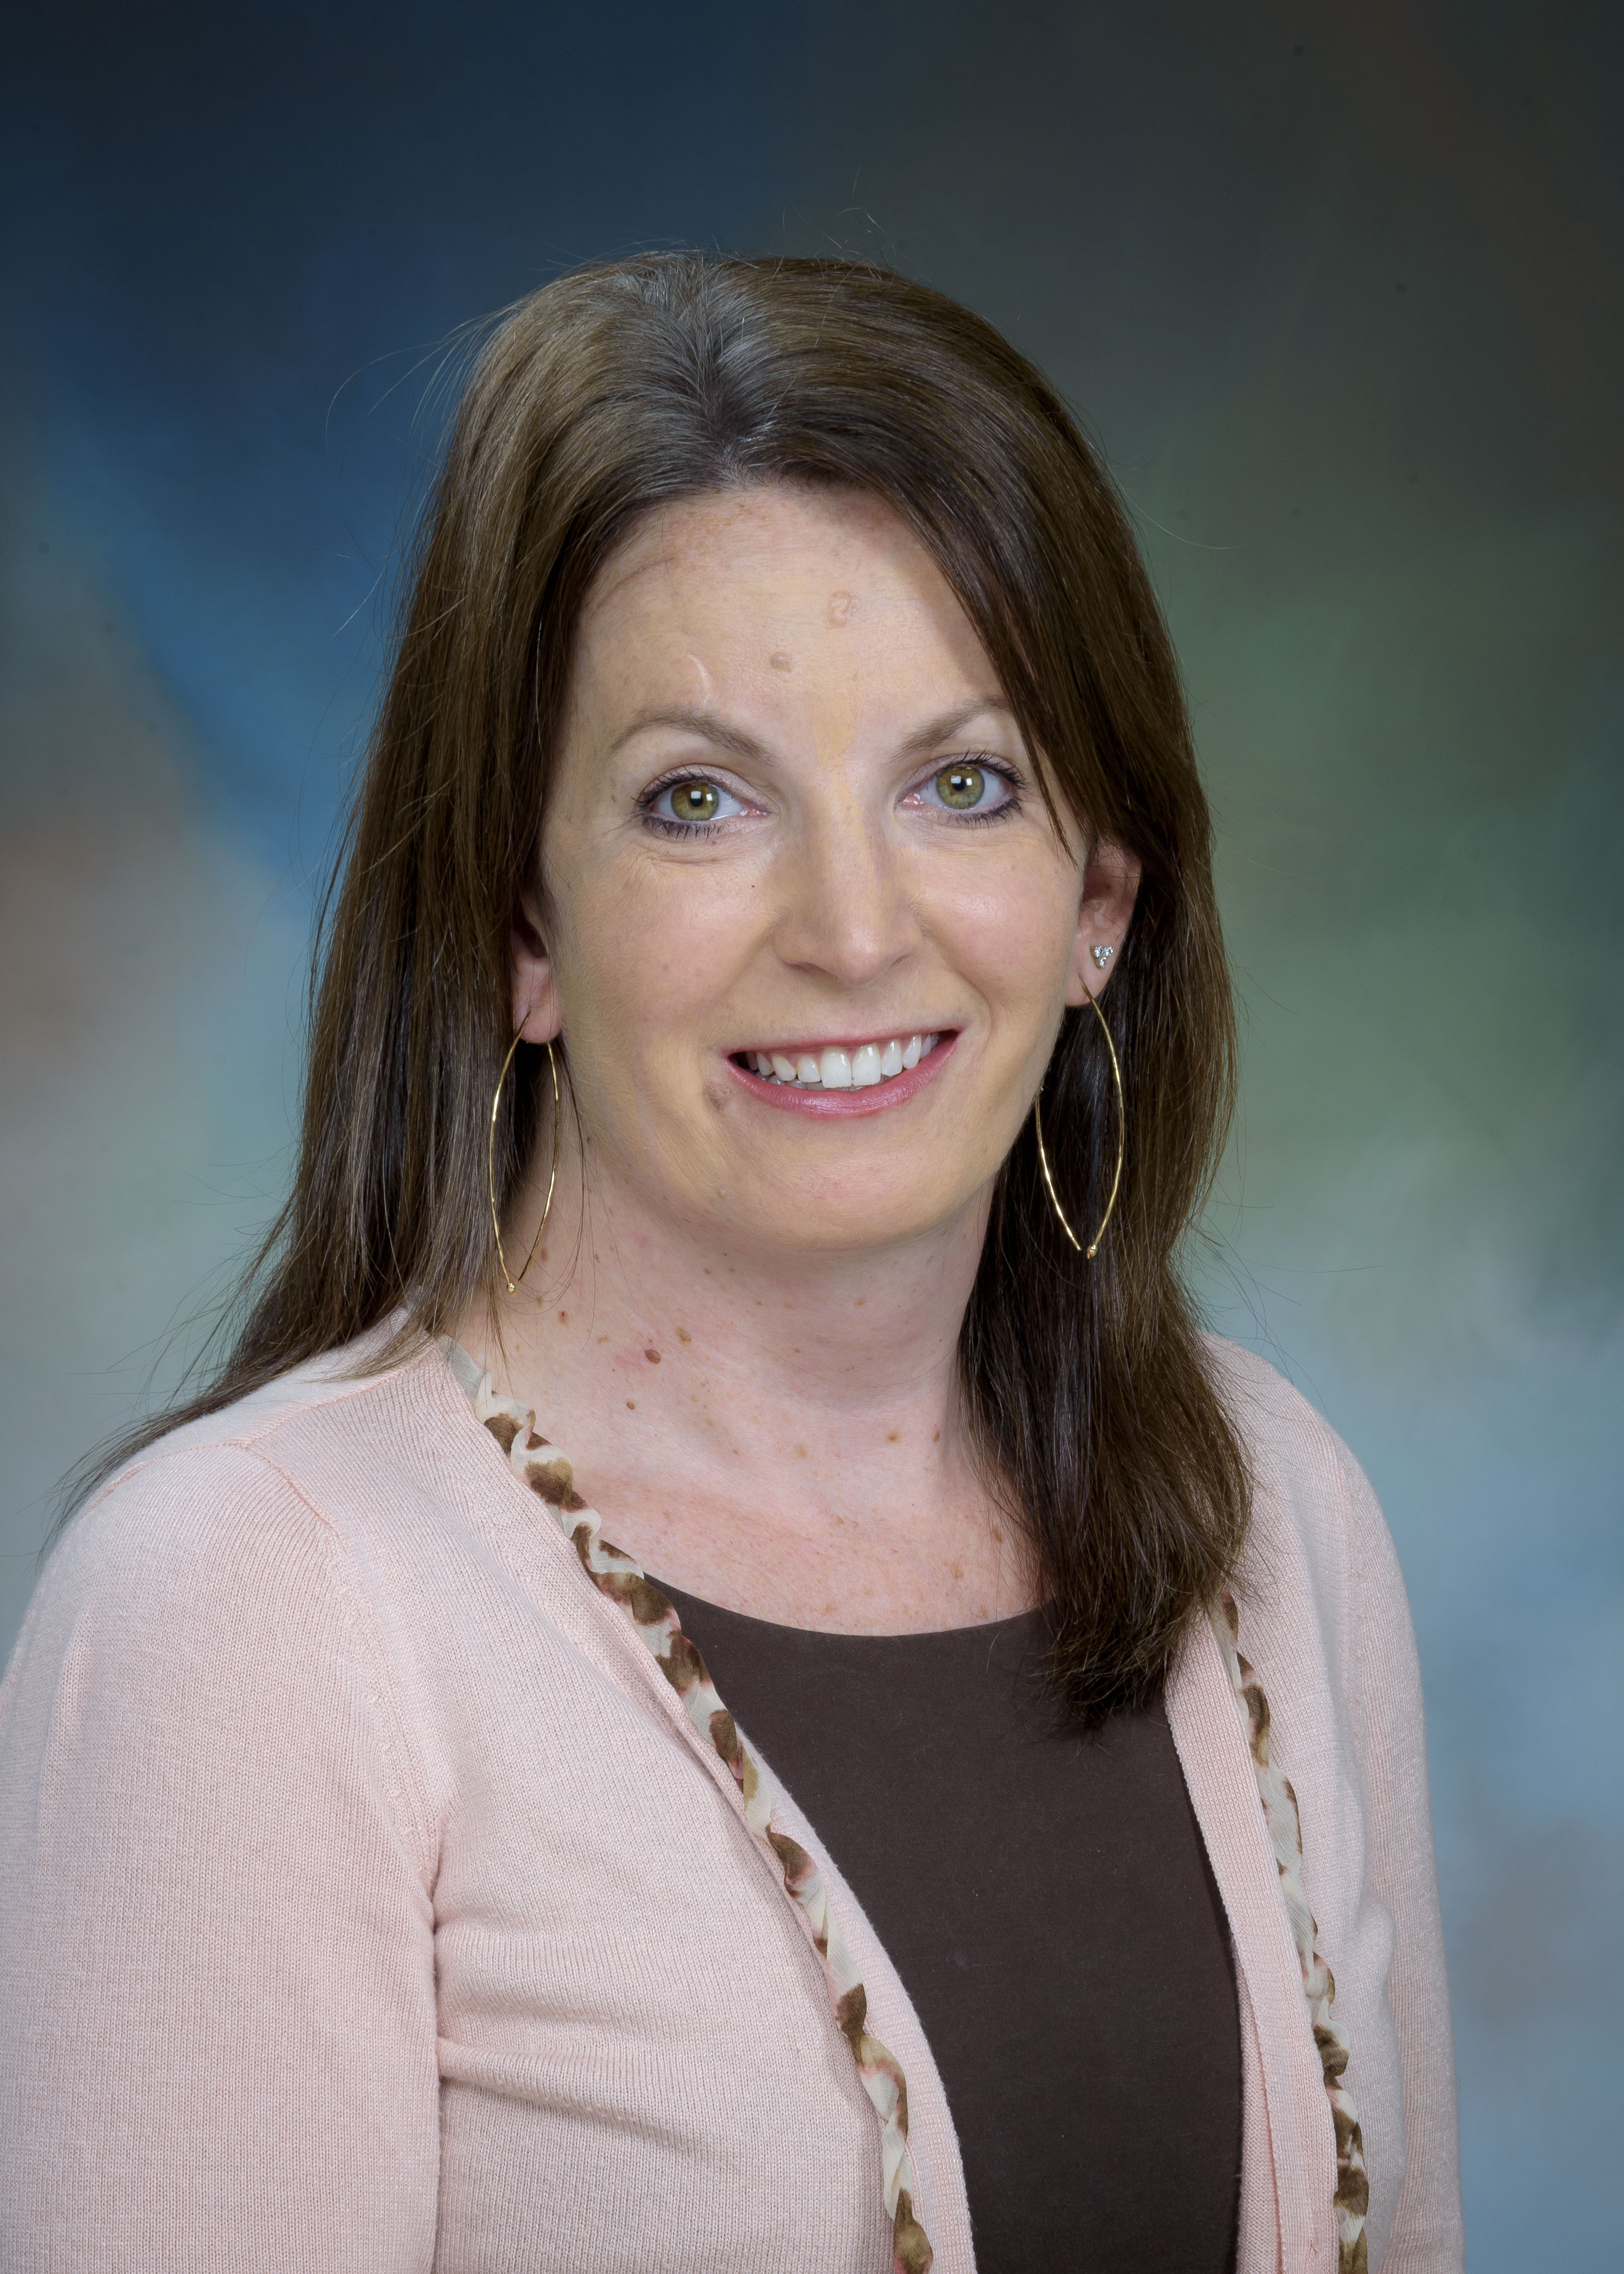 headshot image of clinical psychologist Dr. Barbara Calvert - a female clinician wearing a brown shirt with a pink cardigan and gold earrings